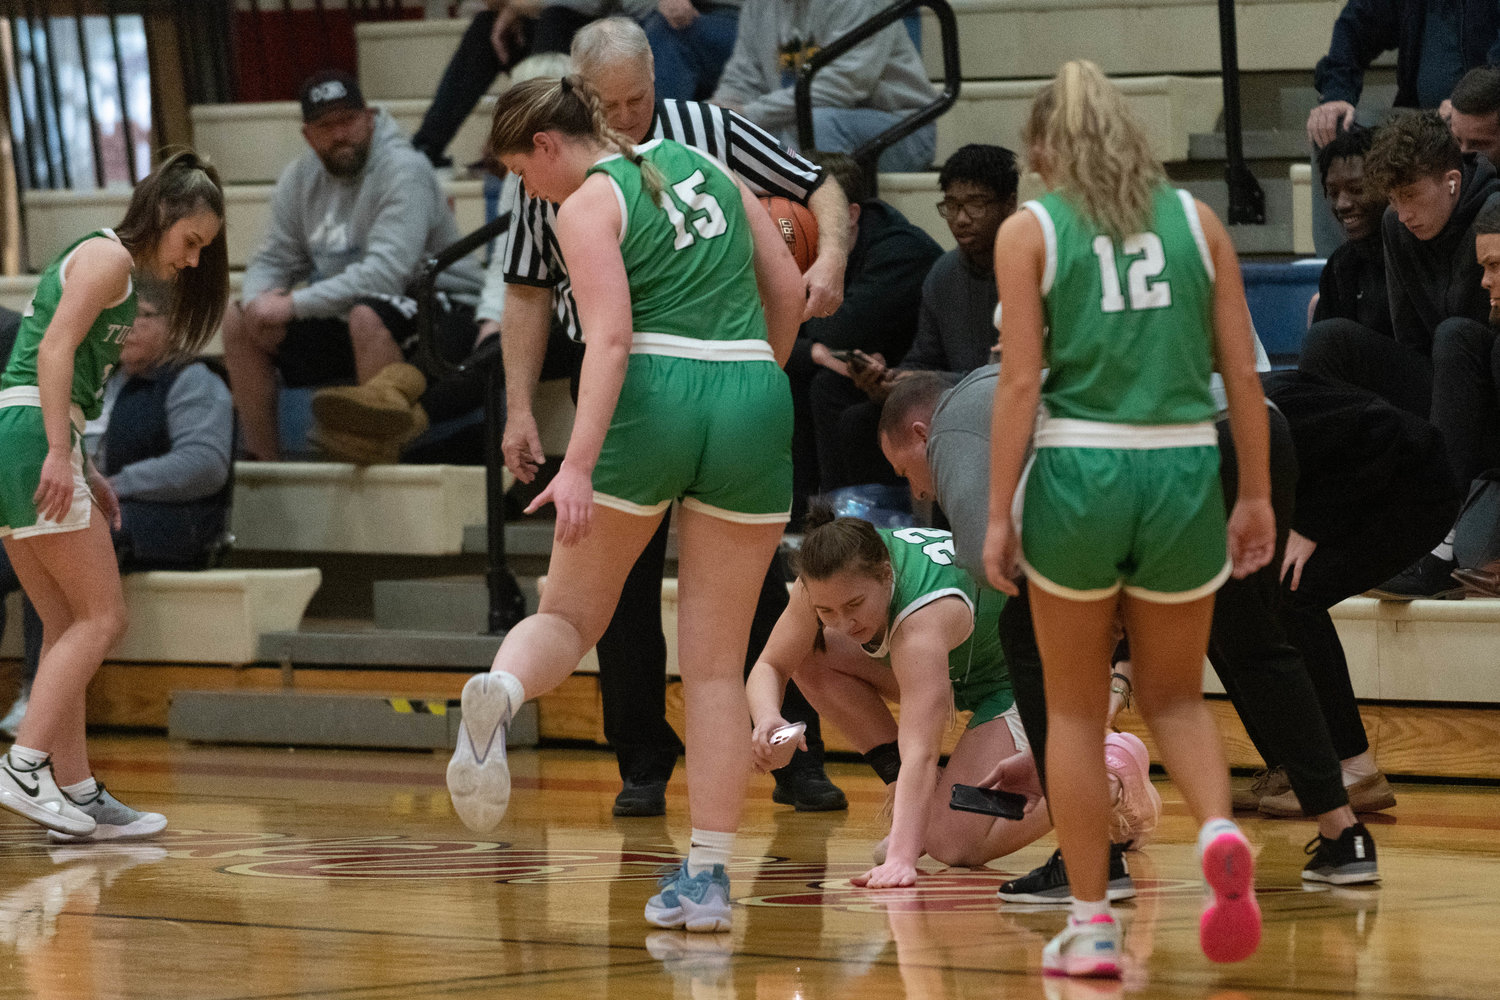 The Thunderbirds team up to look for a lost contact lens during the first quarter of the T-Birds' 39-25 win over Kelso on Jan. 16 at the LCC MLK Day Classic in Longview.